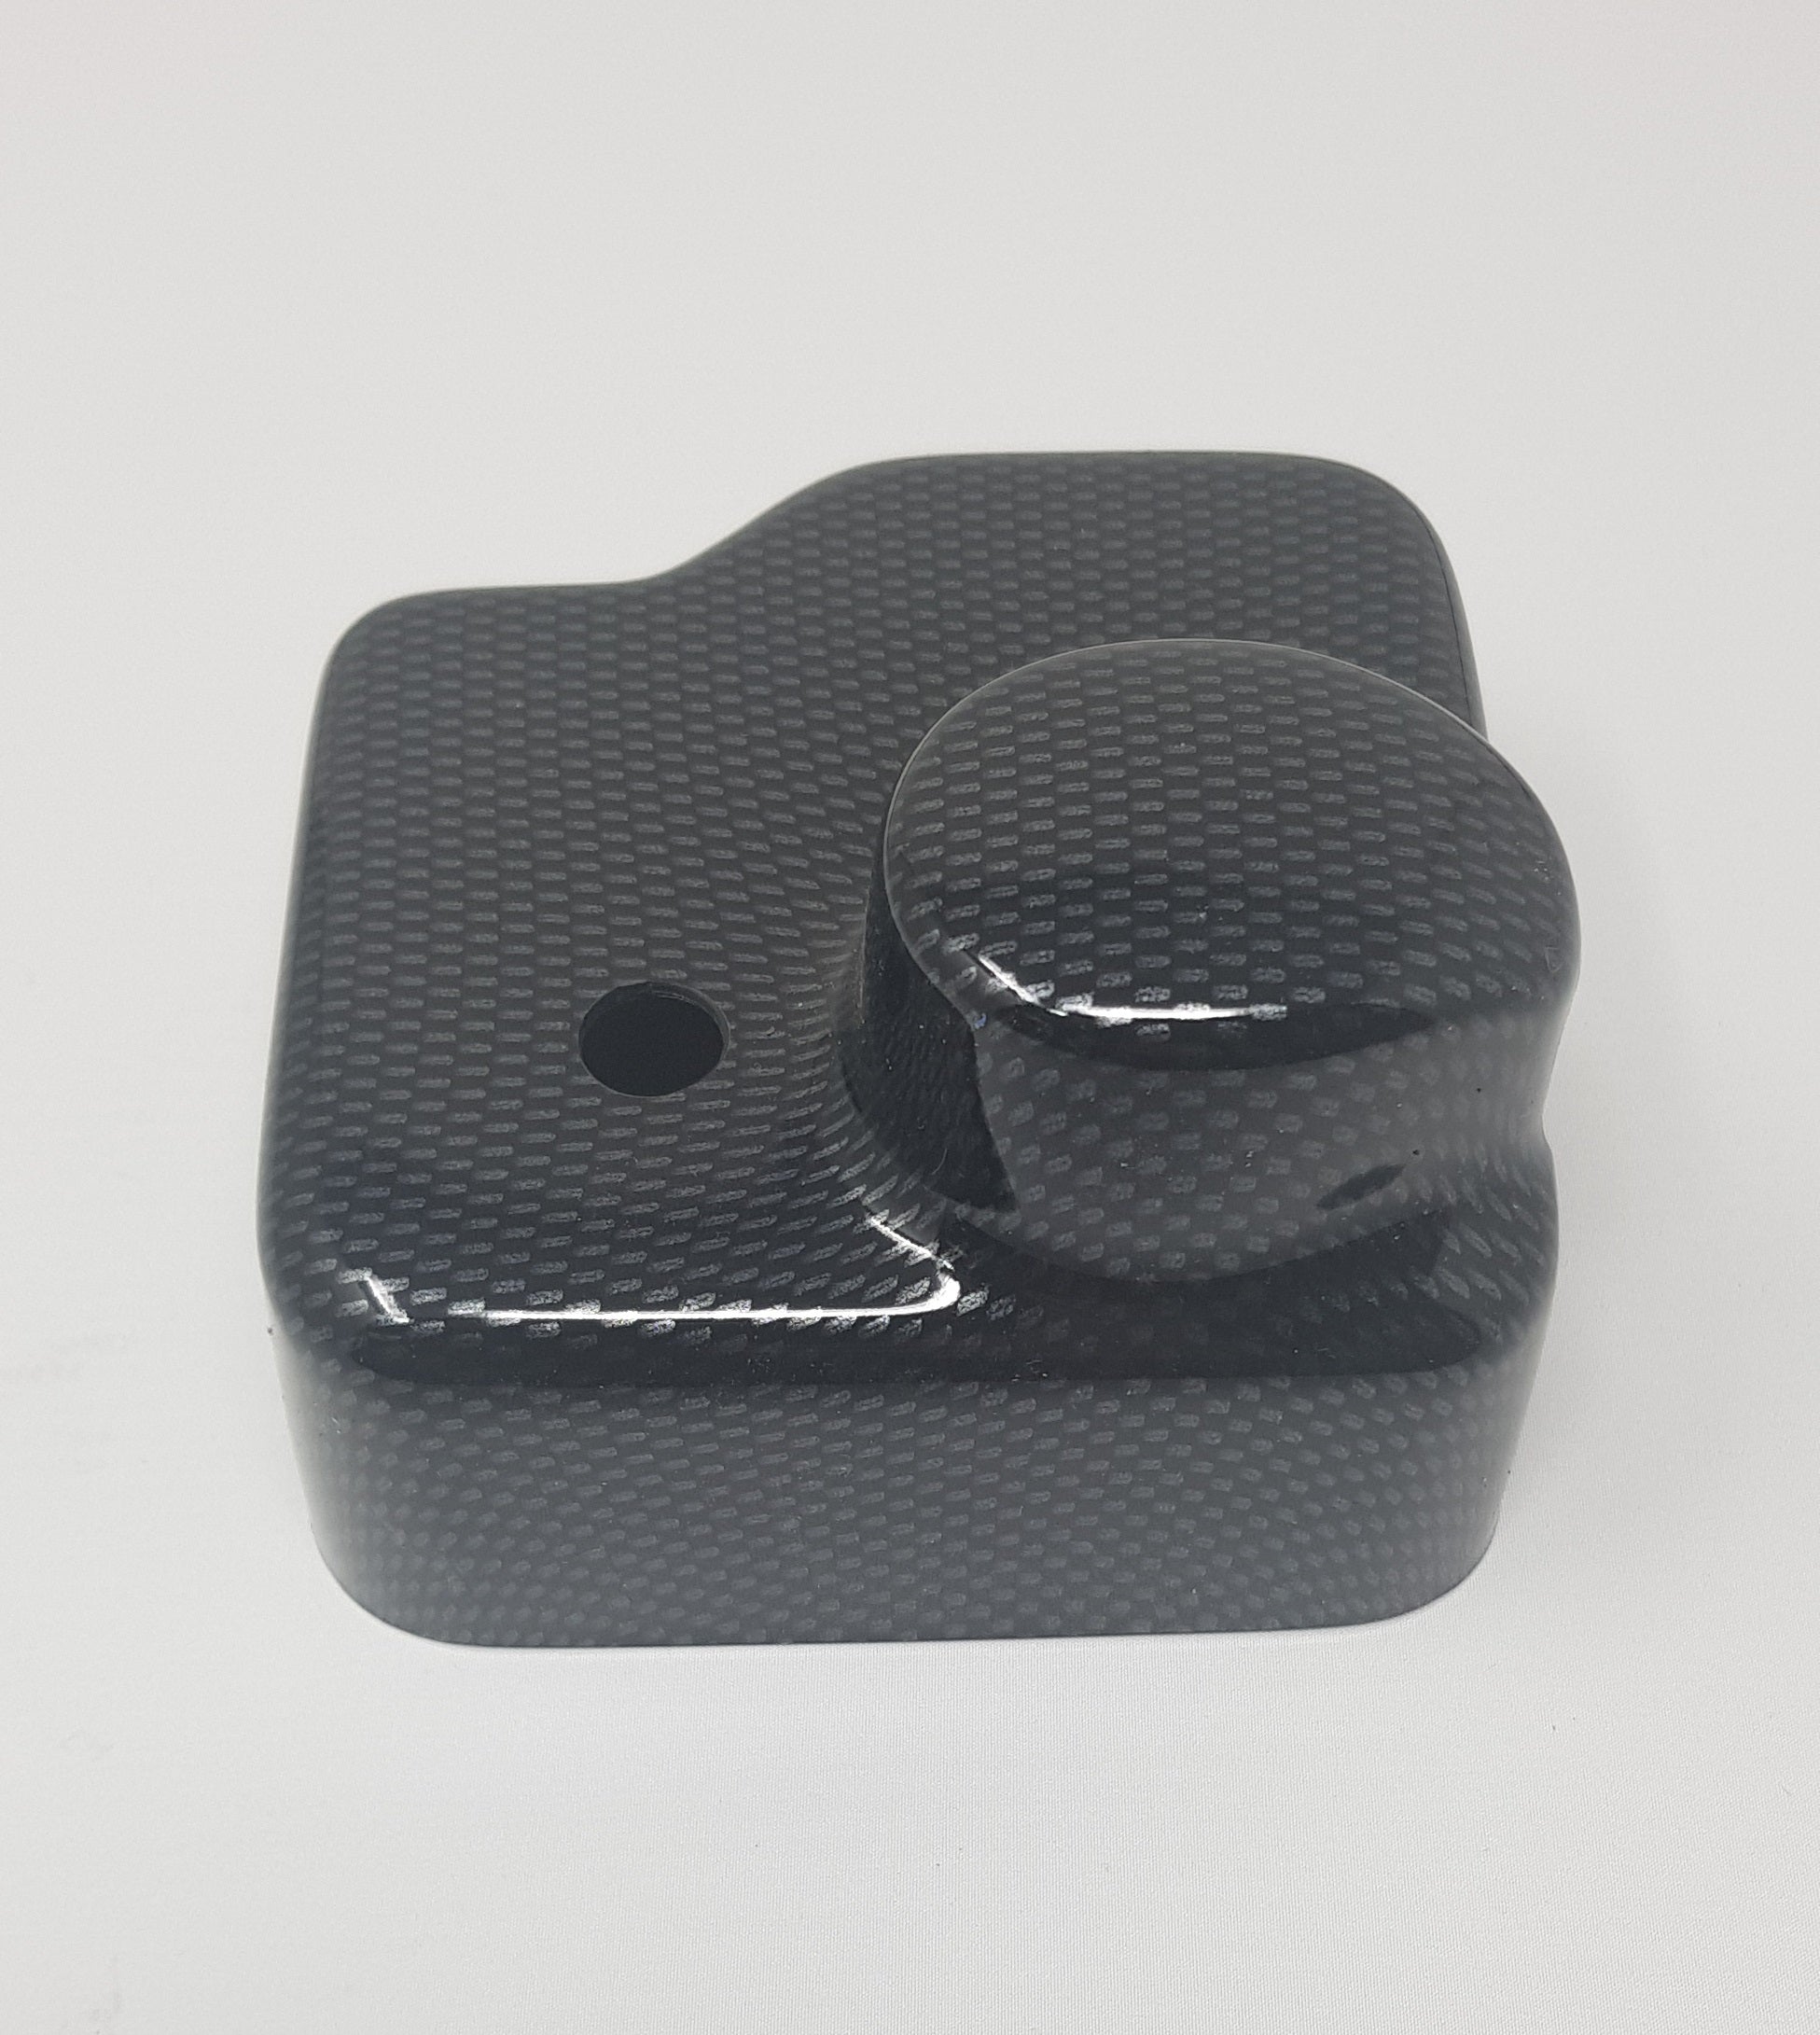 Proform Charcoal Canister Cover - Seat Leon (Plastic Finishes)